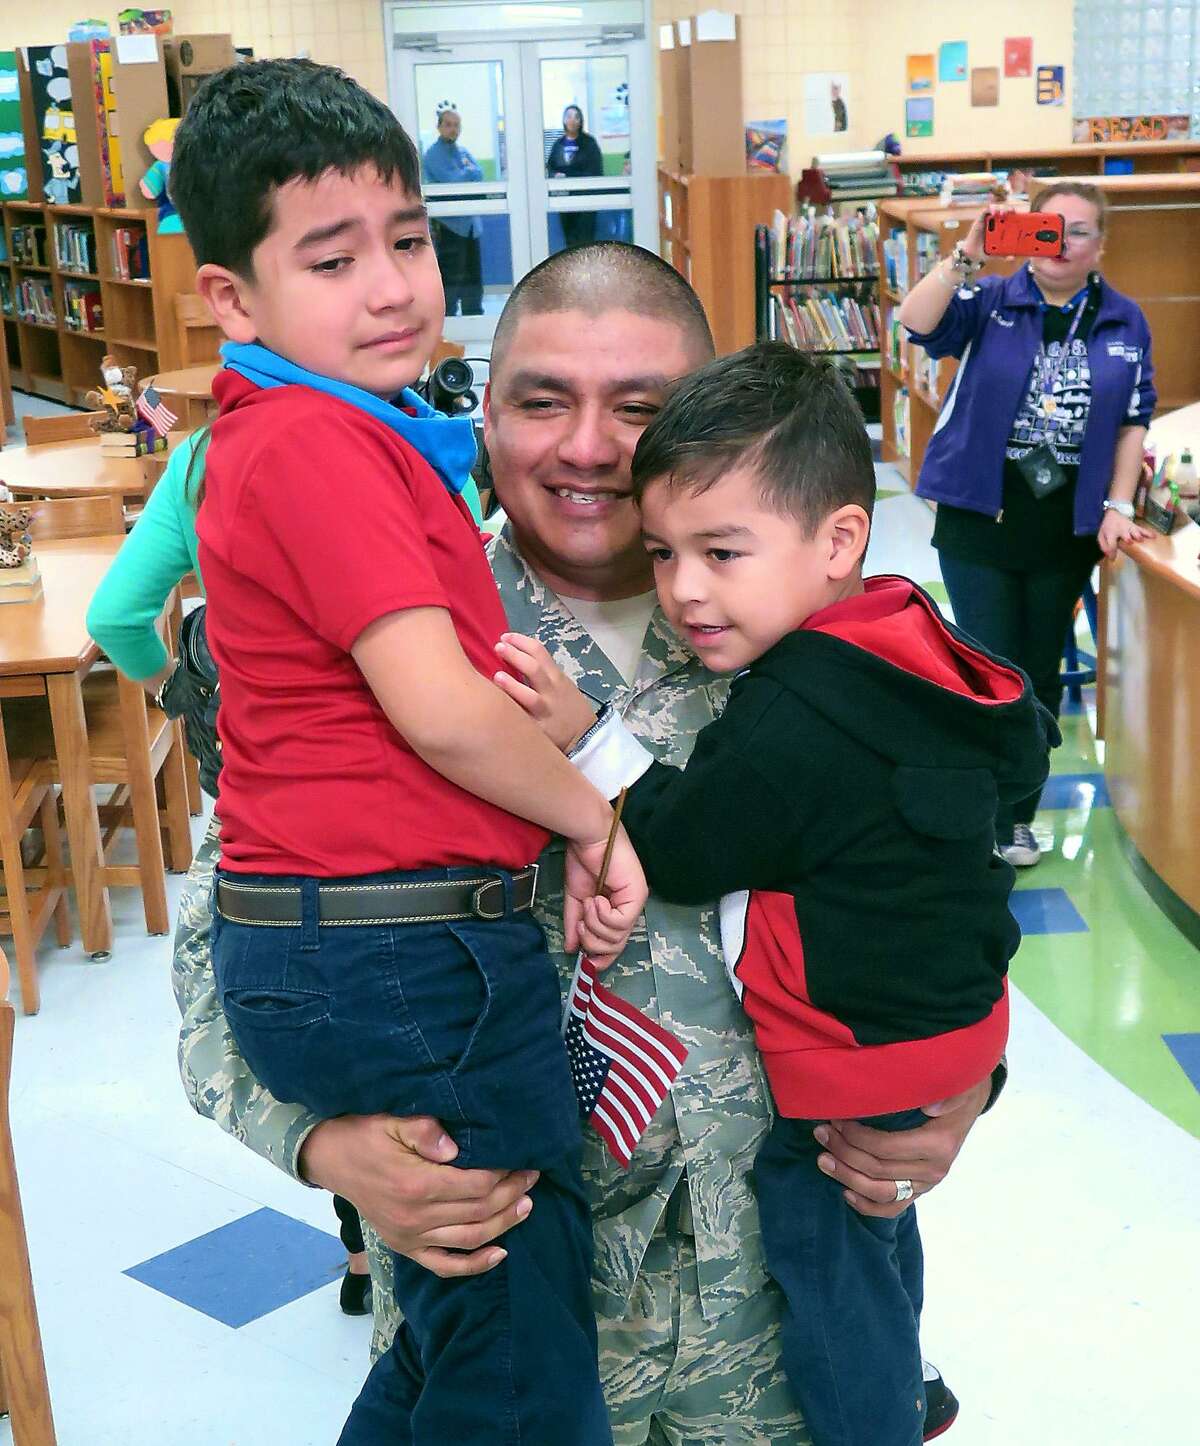 U.S. Air Force Technical Sgt. Jesus Garza, who has been serving overseas, shares a moment with his two children, Jesus Emiliano, 8, and Jesus Alejandro, 3, at their school Thursday. Garza had not seen his children since last summer and surprised them in the Ryan Elementary library, where students also thanked him for his service in the military. According to Laredo ISD, Garza had been stationed in Turkey.